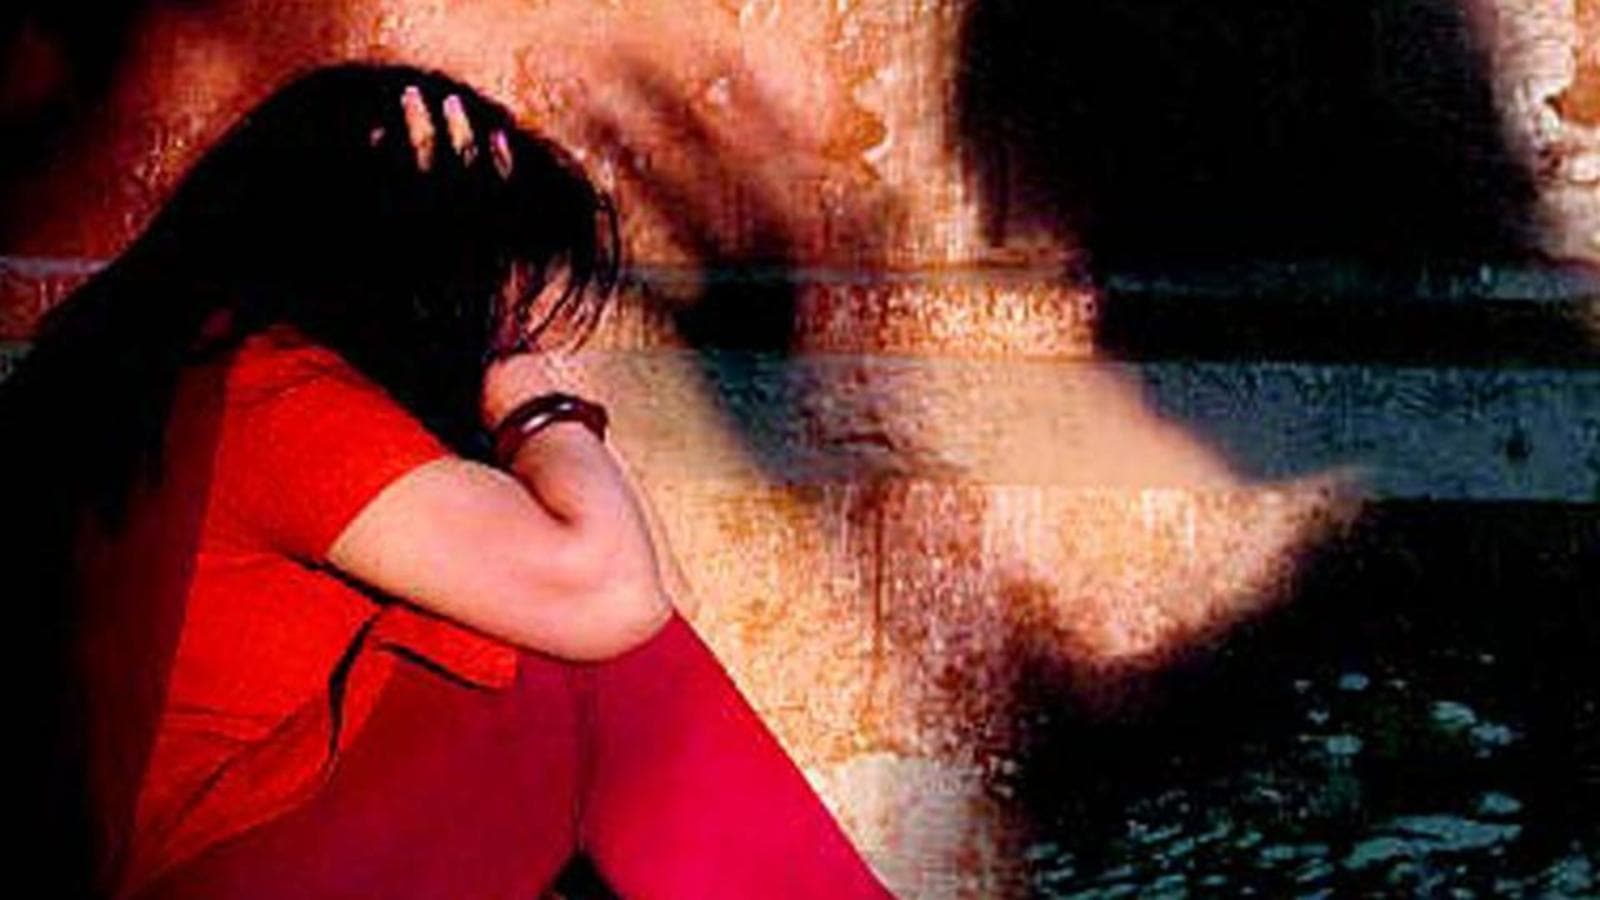 Indian Rafe Porn Video - Kerala model gang-raped in Kochi, one arrested: Police | Latest News India  - Hindustan Times